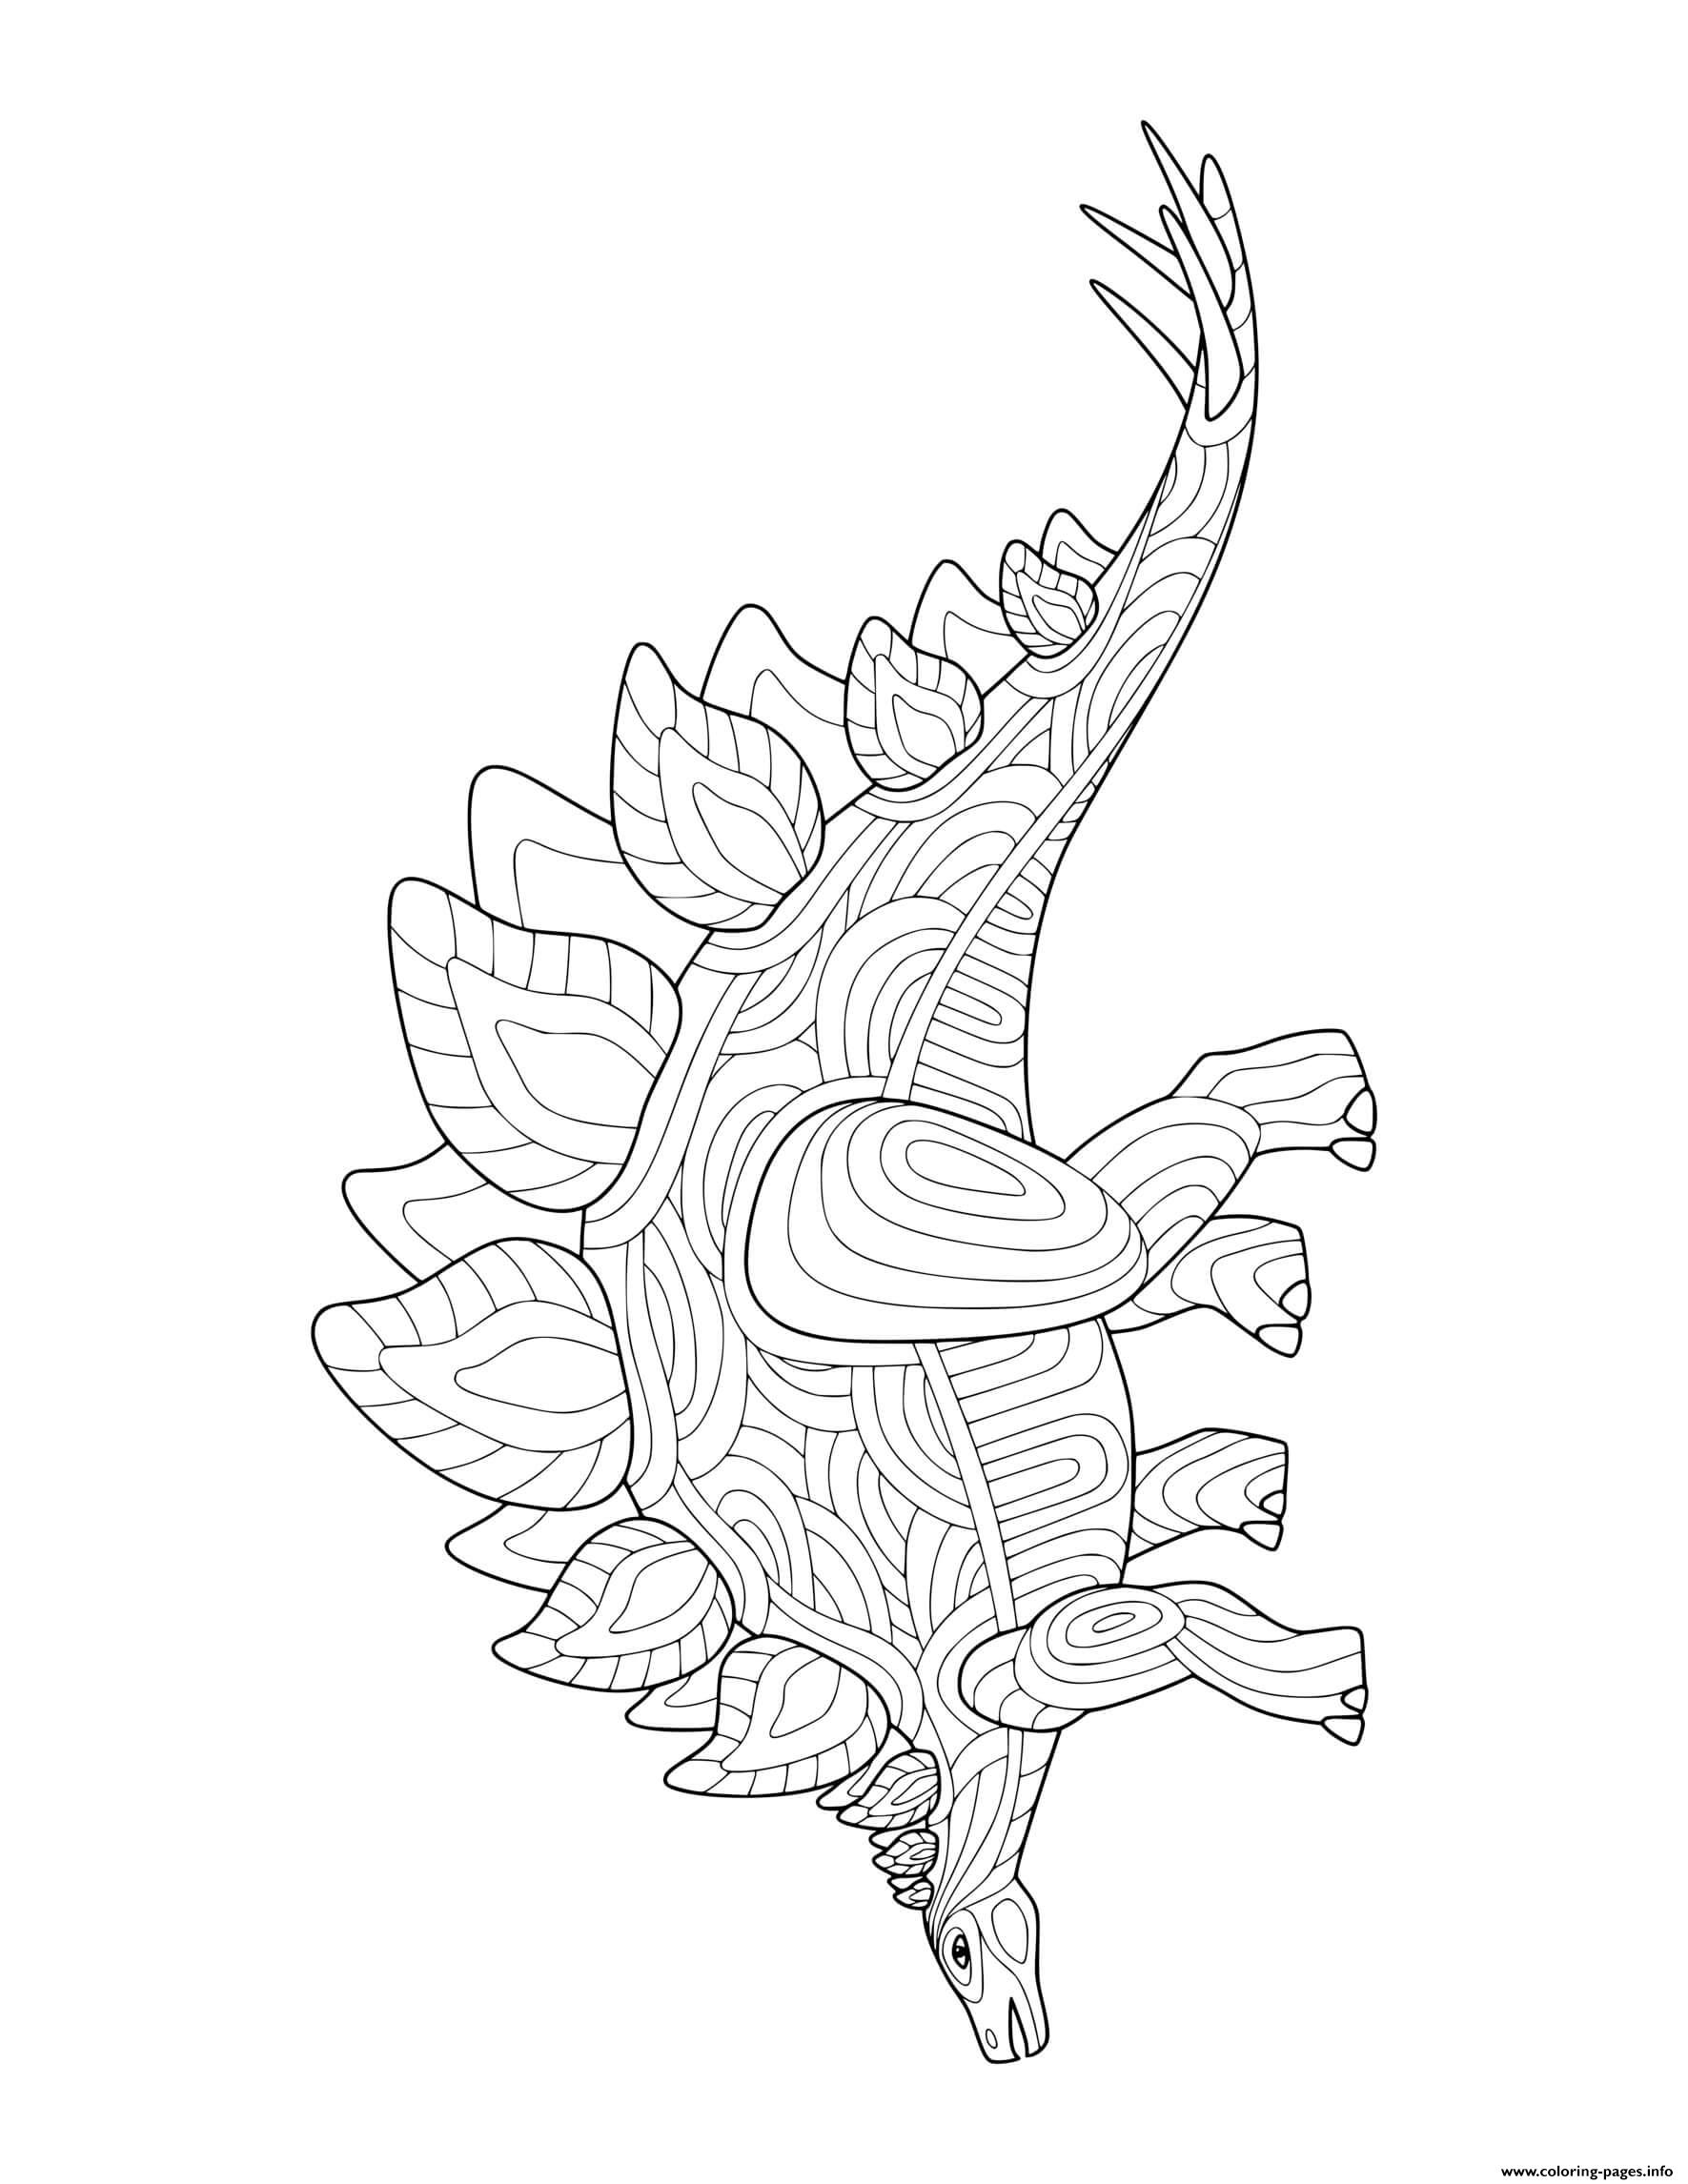 Dinosaur Stegosaurus Doodle For Adults coloring